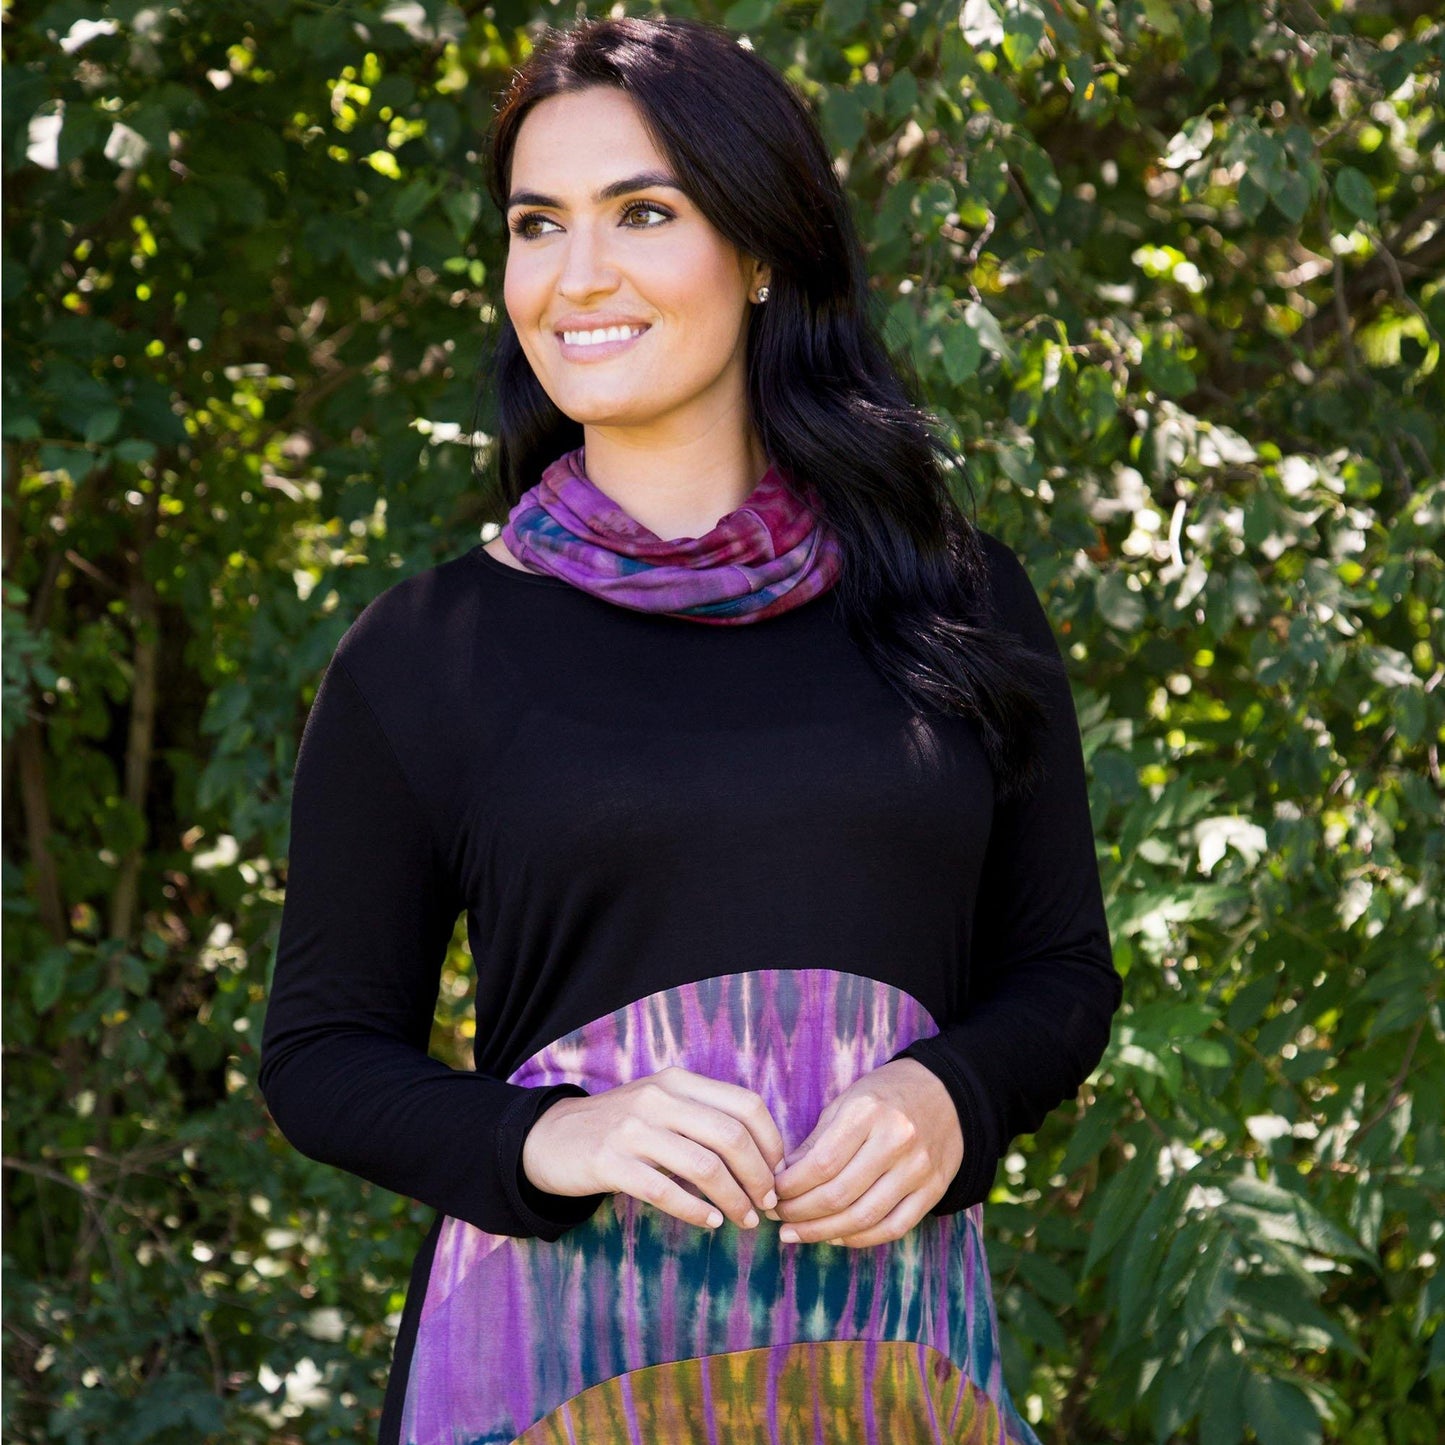 Over The Moon Tunic & Scarf Set